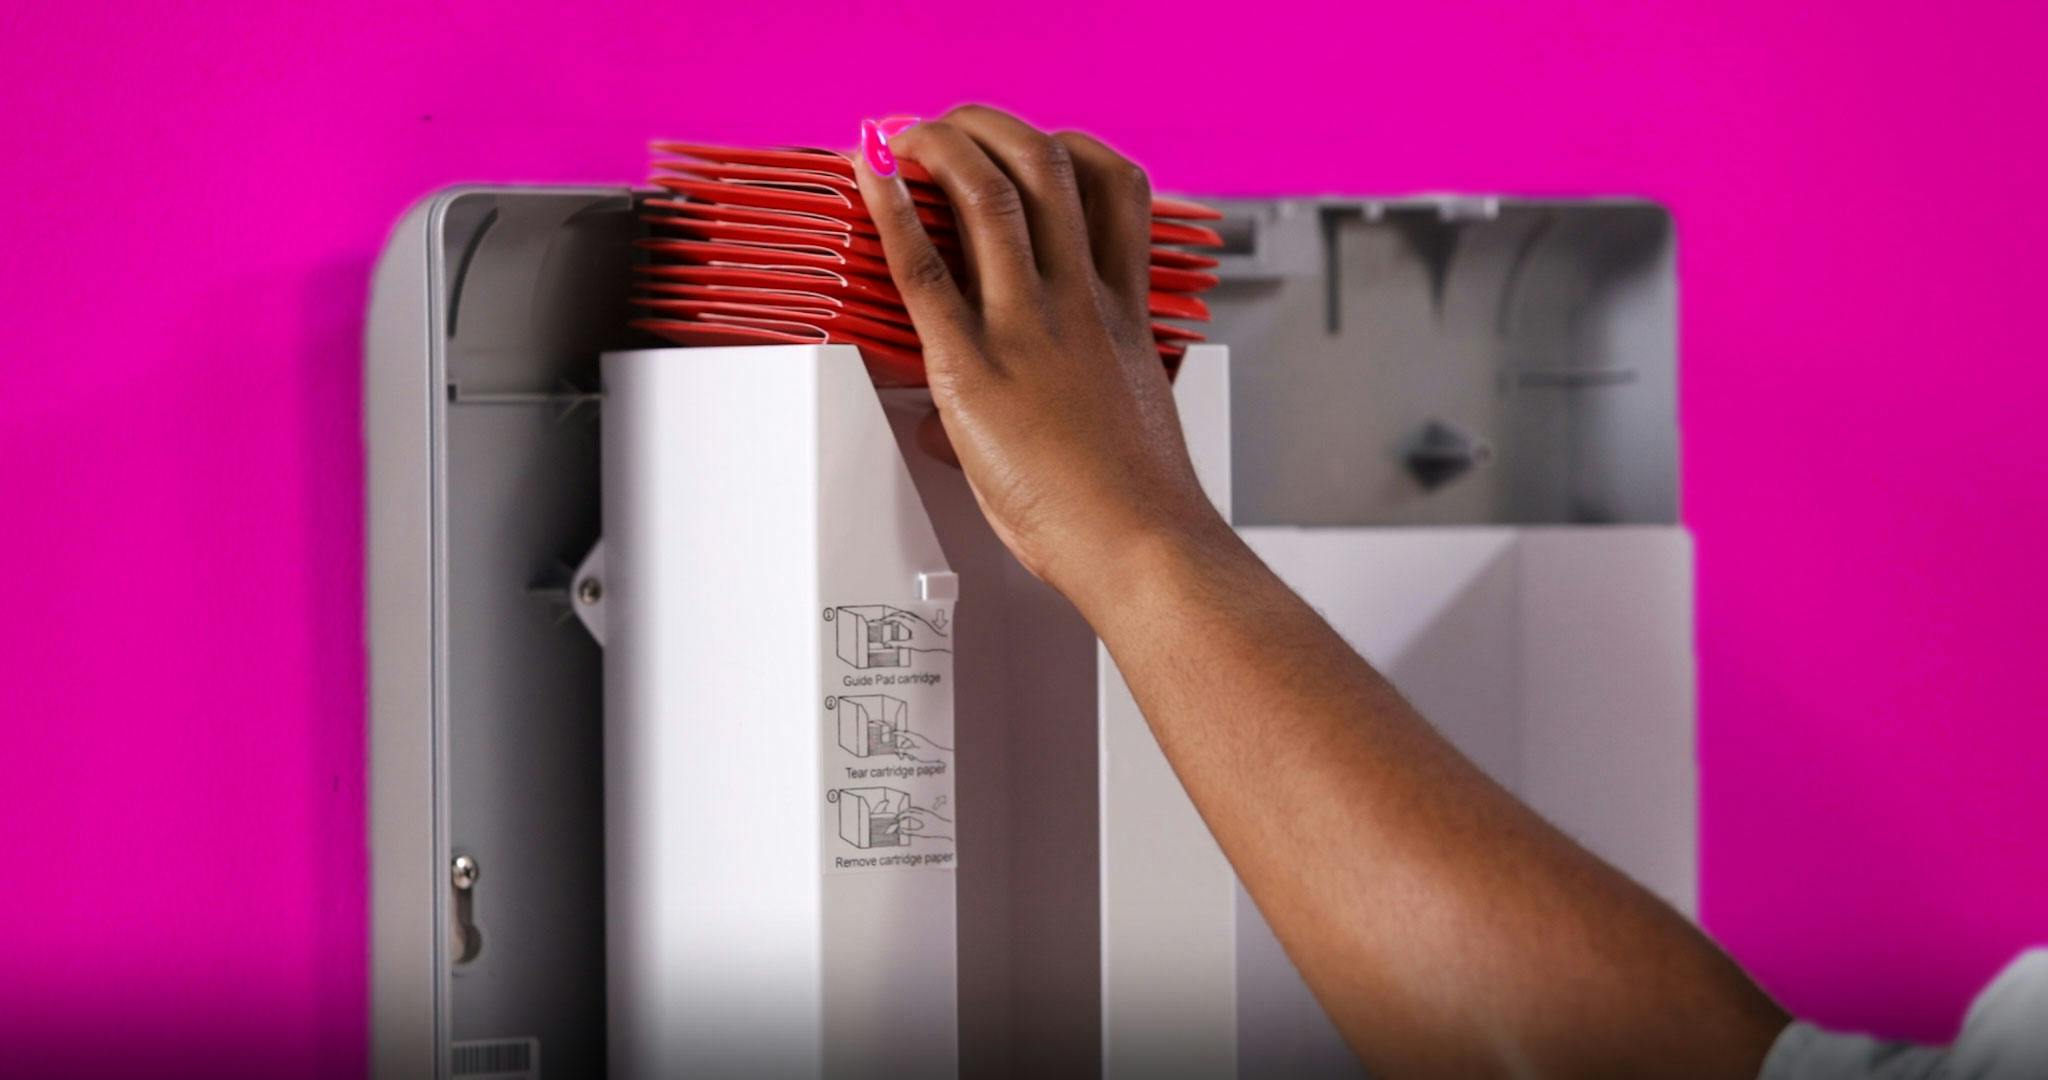 A hand with nail polish refilling a vending machine with menstrual pads